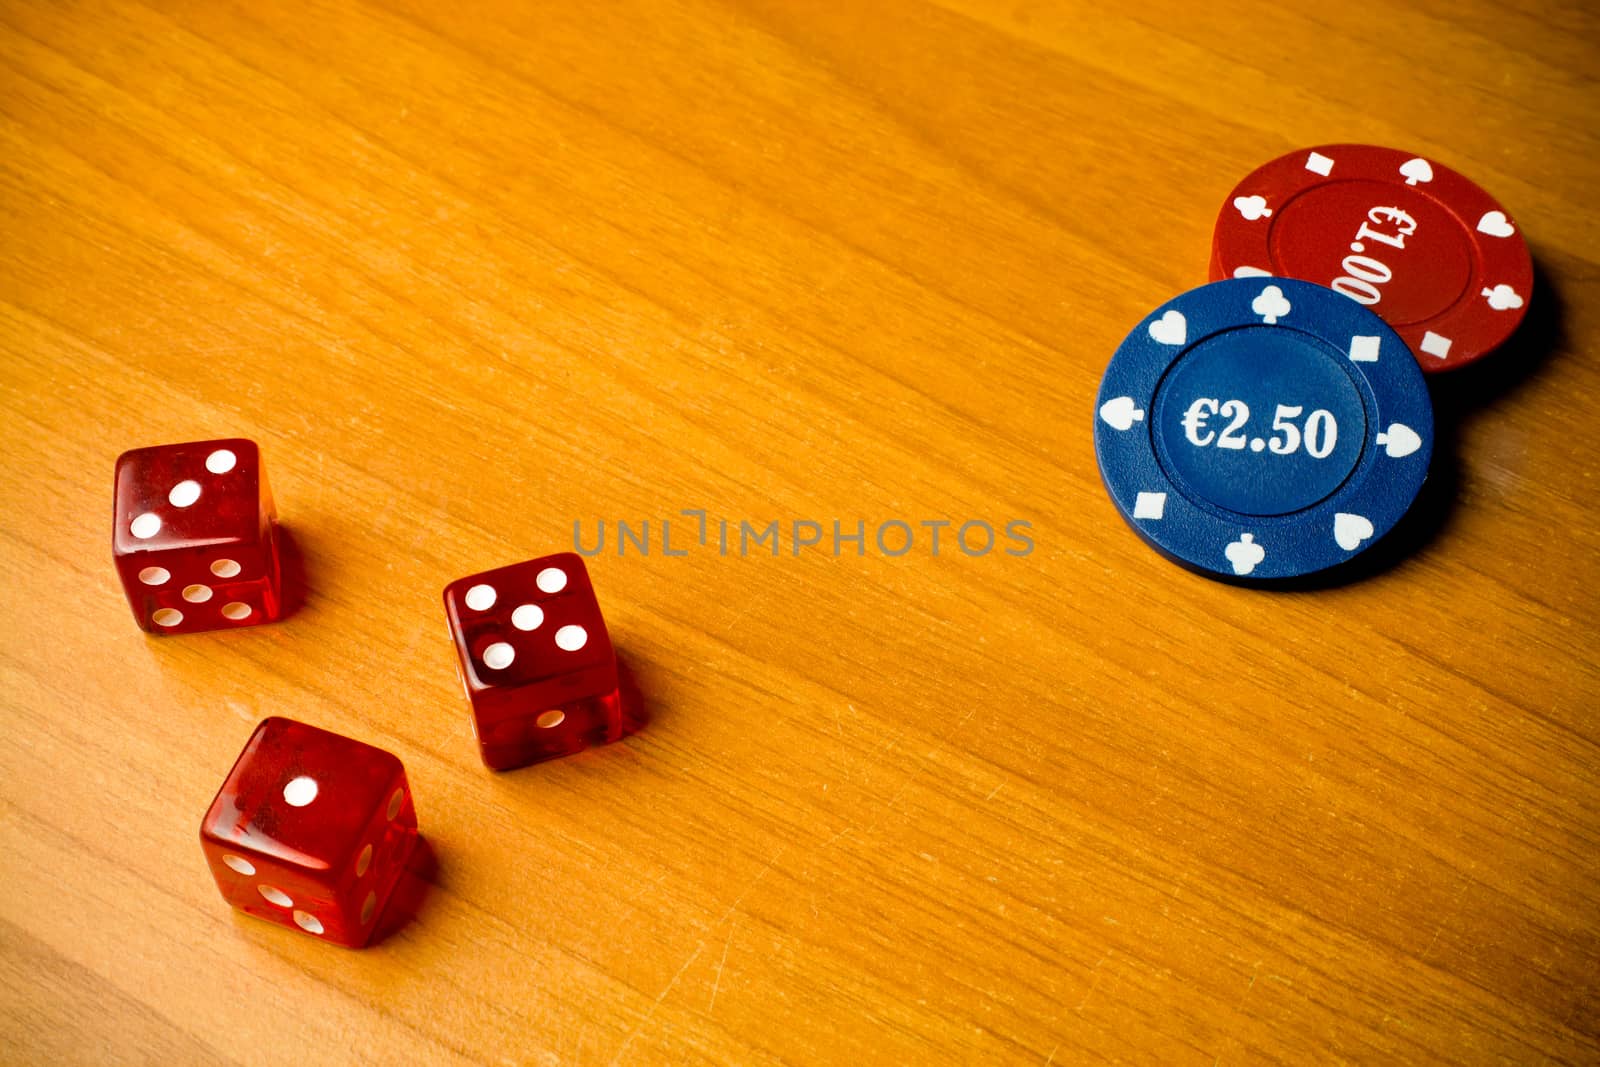 detail of dice and gambling chips on old wood